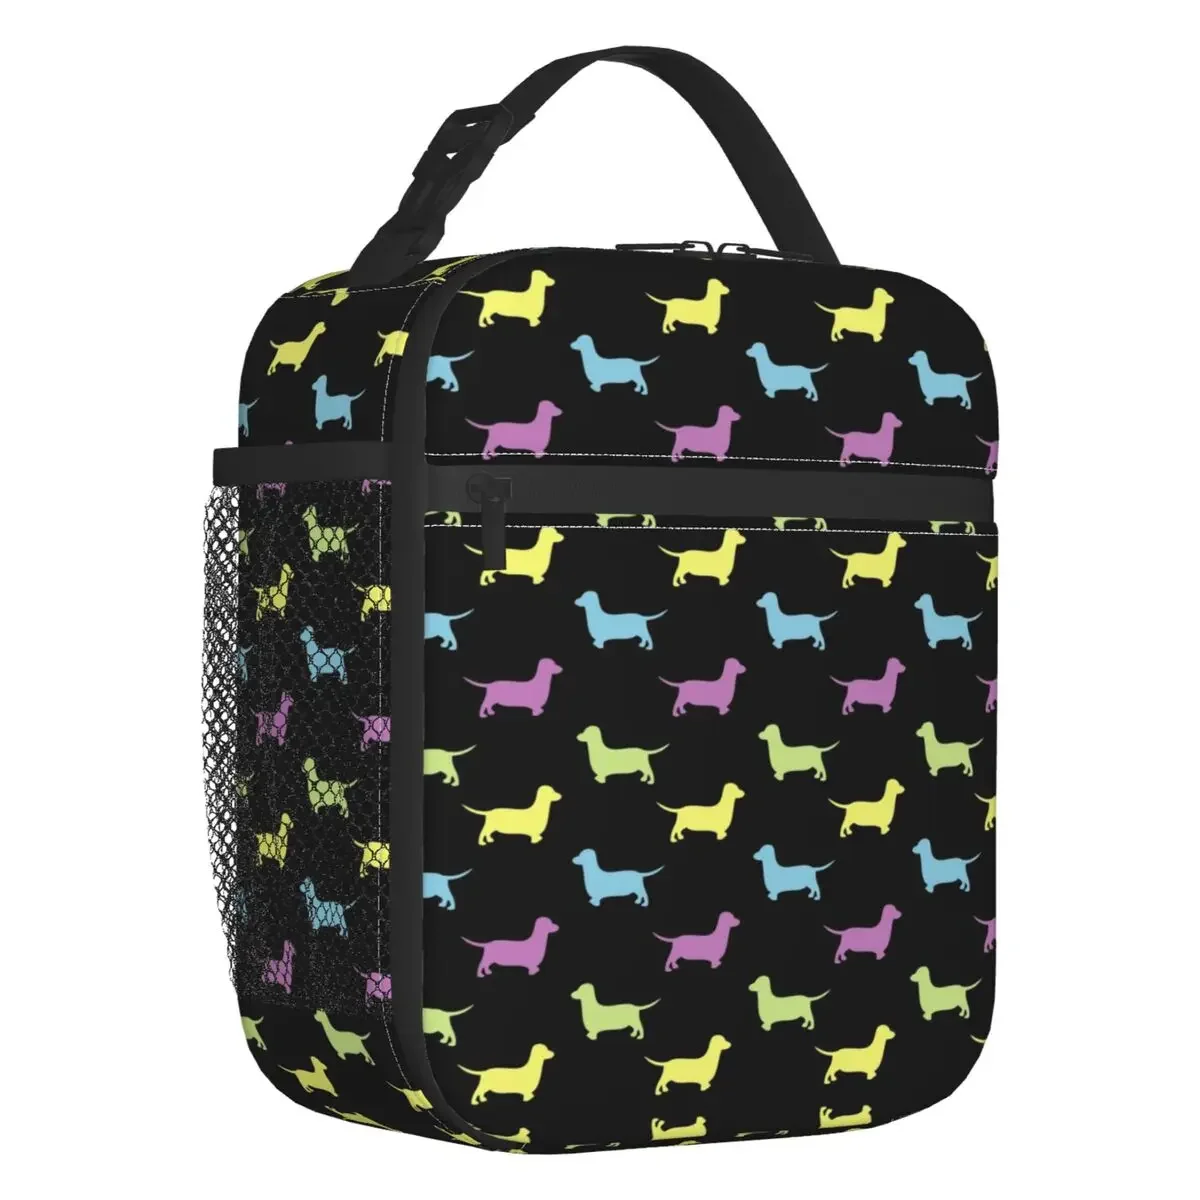 

Dachshund Pattern Resuable Lunch Box Leakproof Wiener Sausage Dog Dackel Cooler Thermal Food Insulated Lunch Bag Kids School